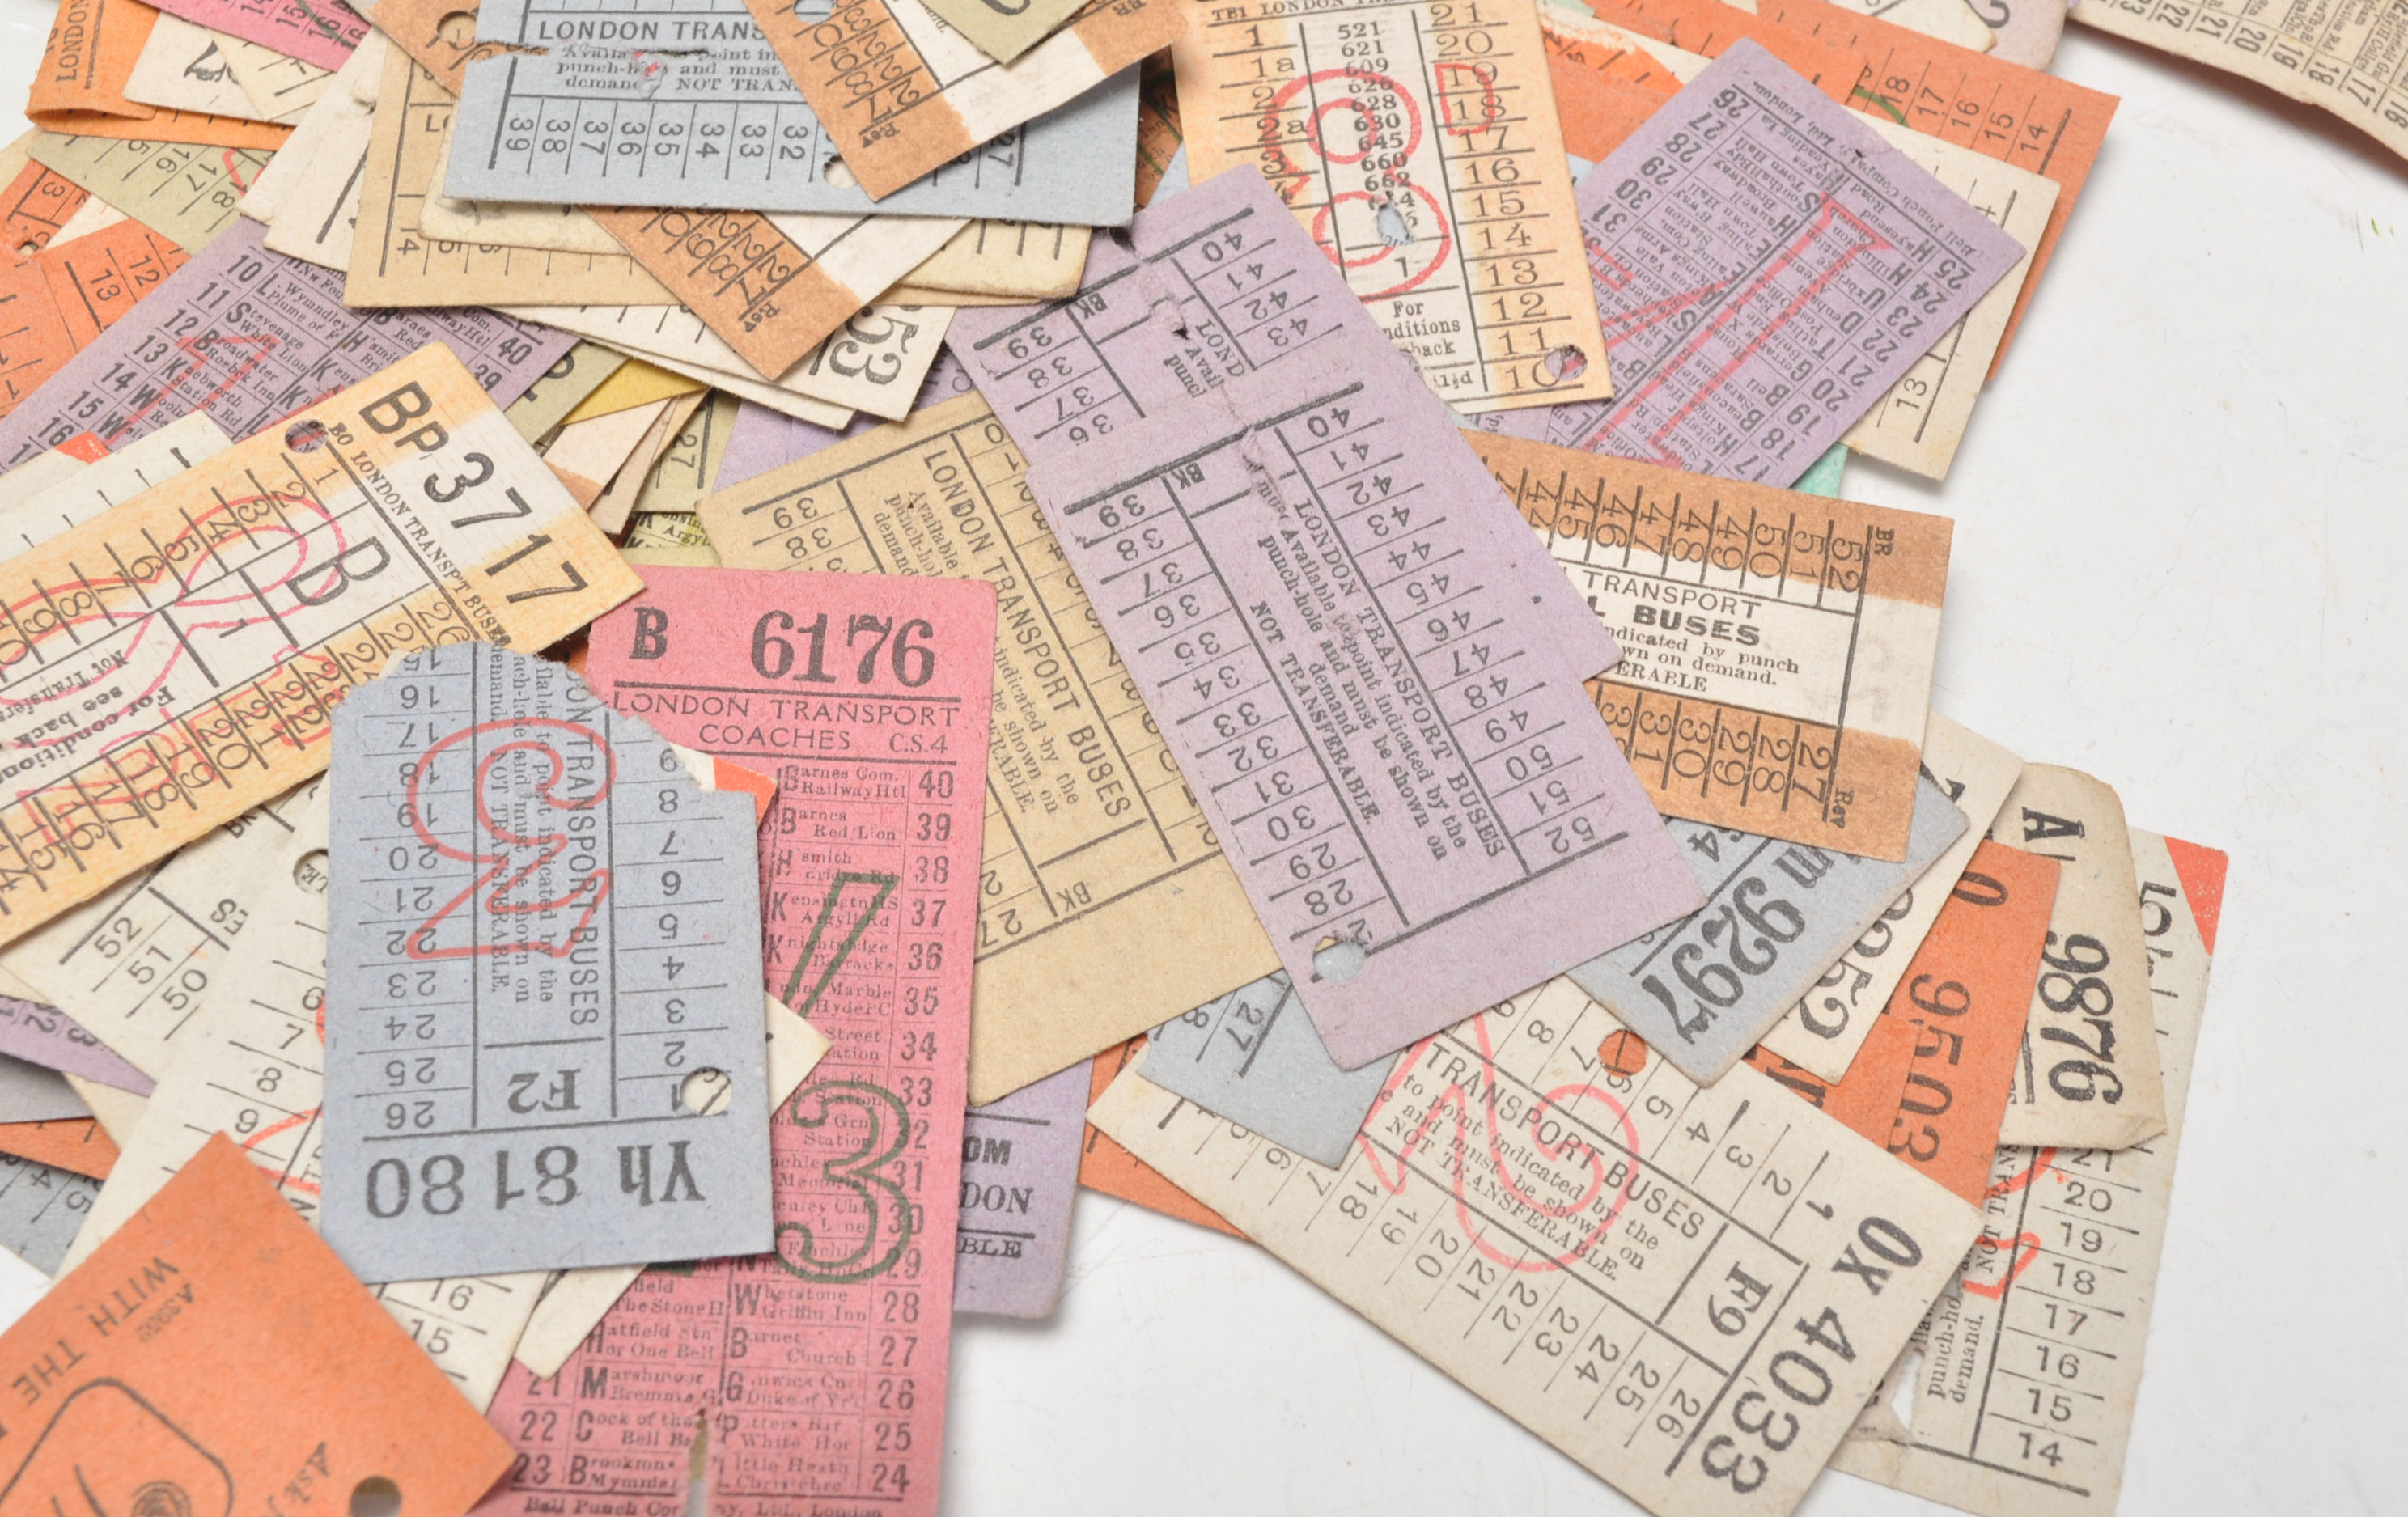 Bus Tickets. Job lot (x175) of vintage London Transport tickets. Buses, Coaches and Country - Image 5 of 7